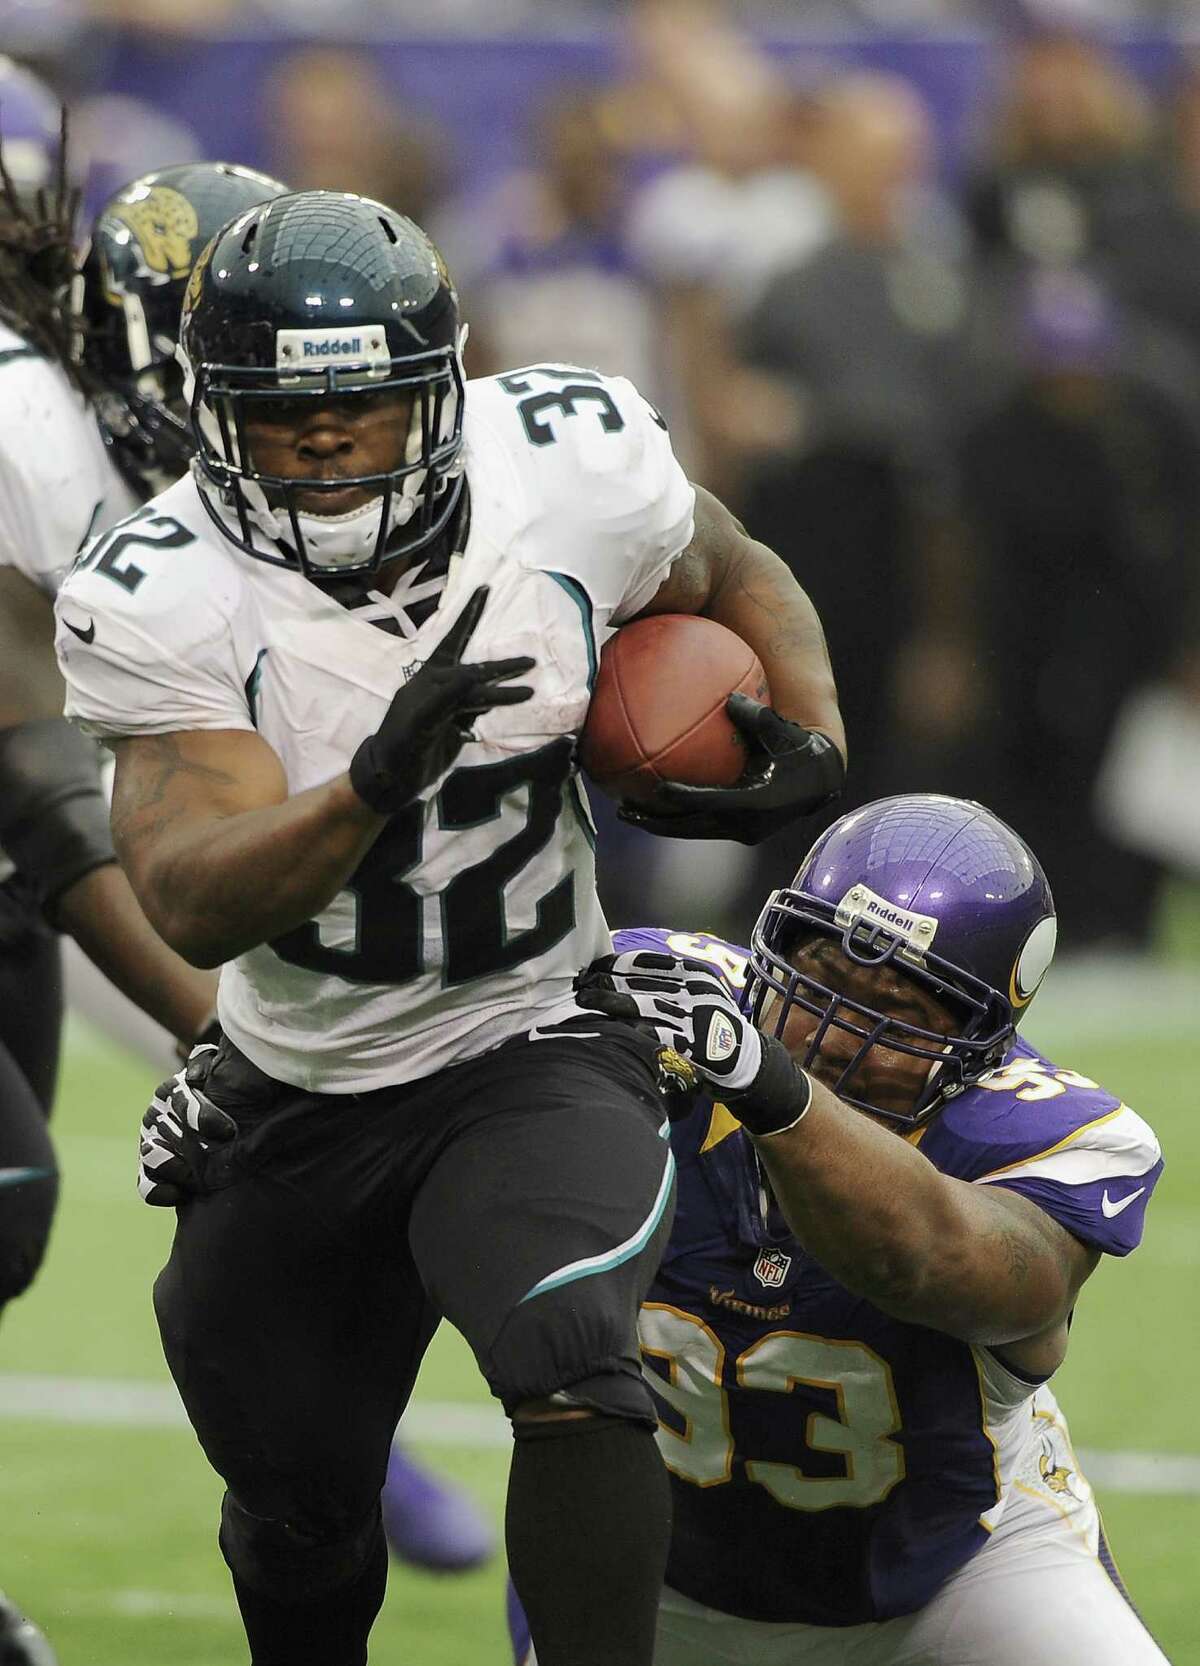 Maurice Jones-Drew showed some players don't need training camp by gaining 77 yards against the Vikings.